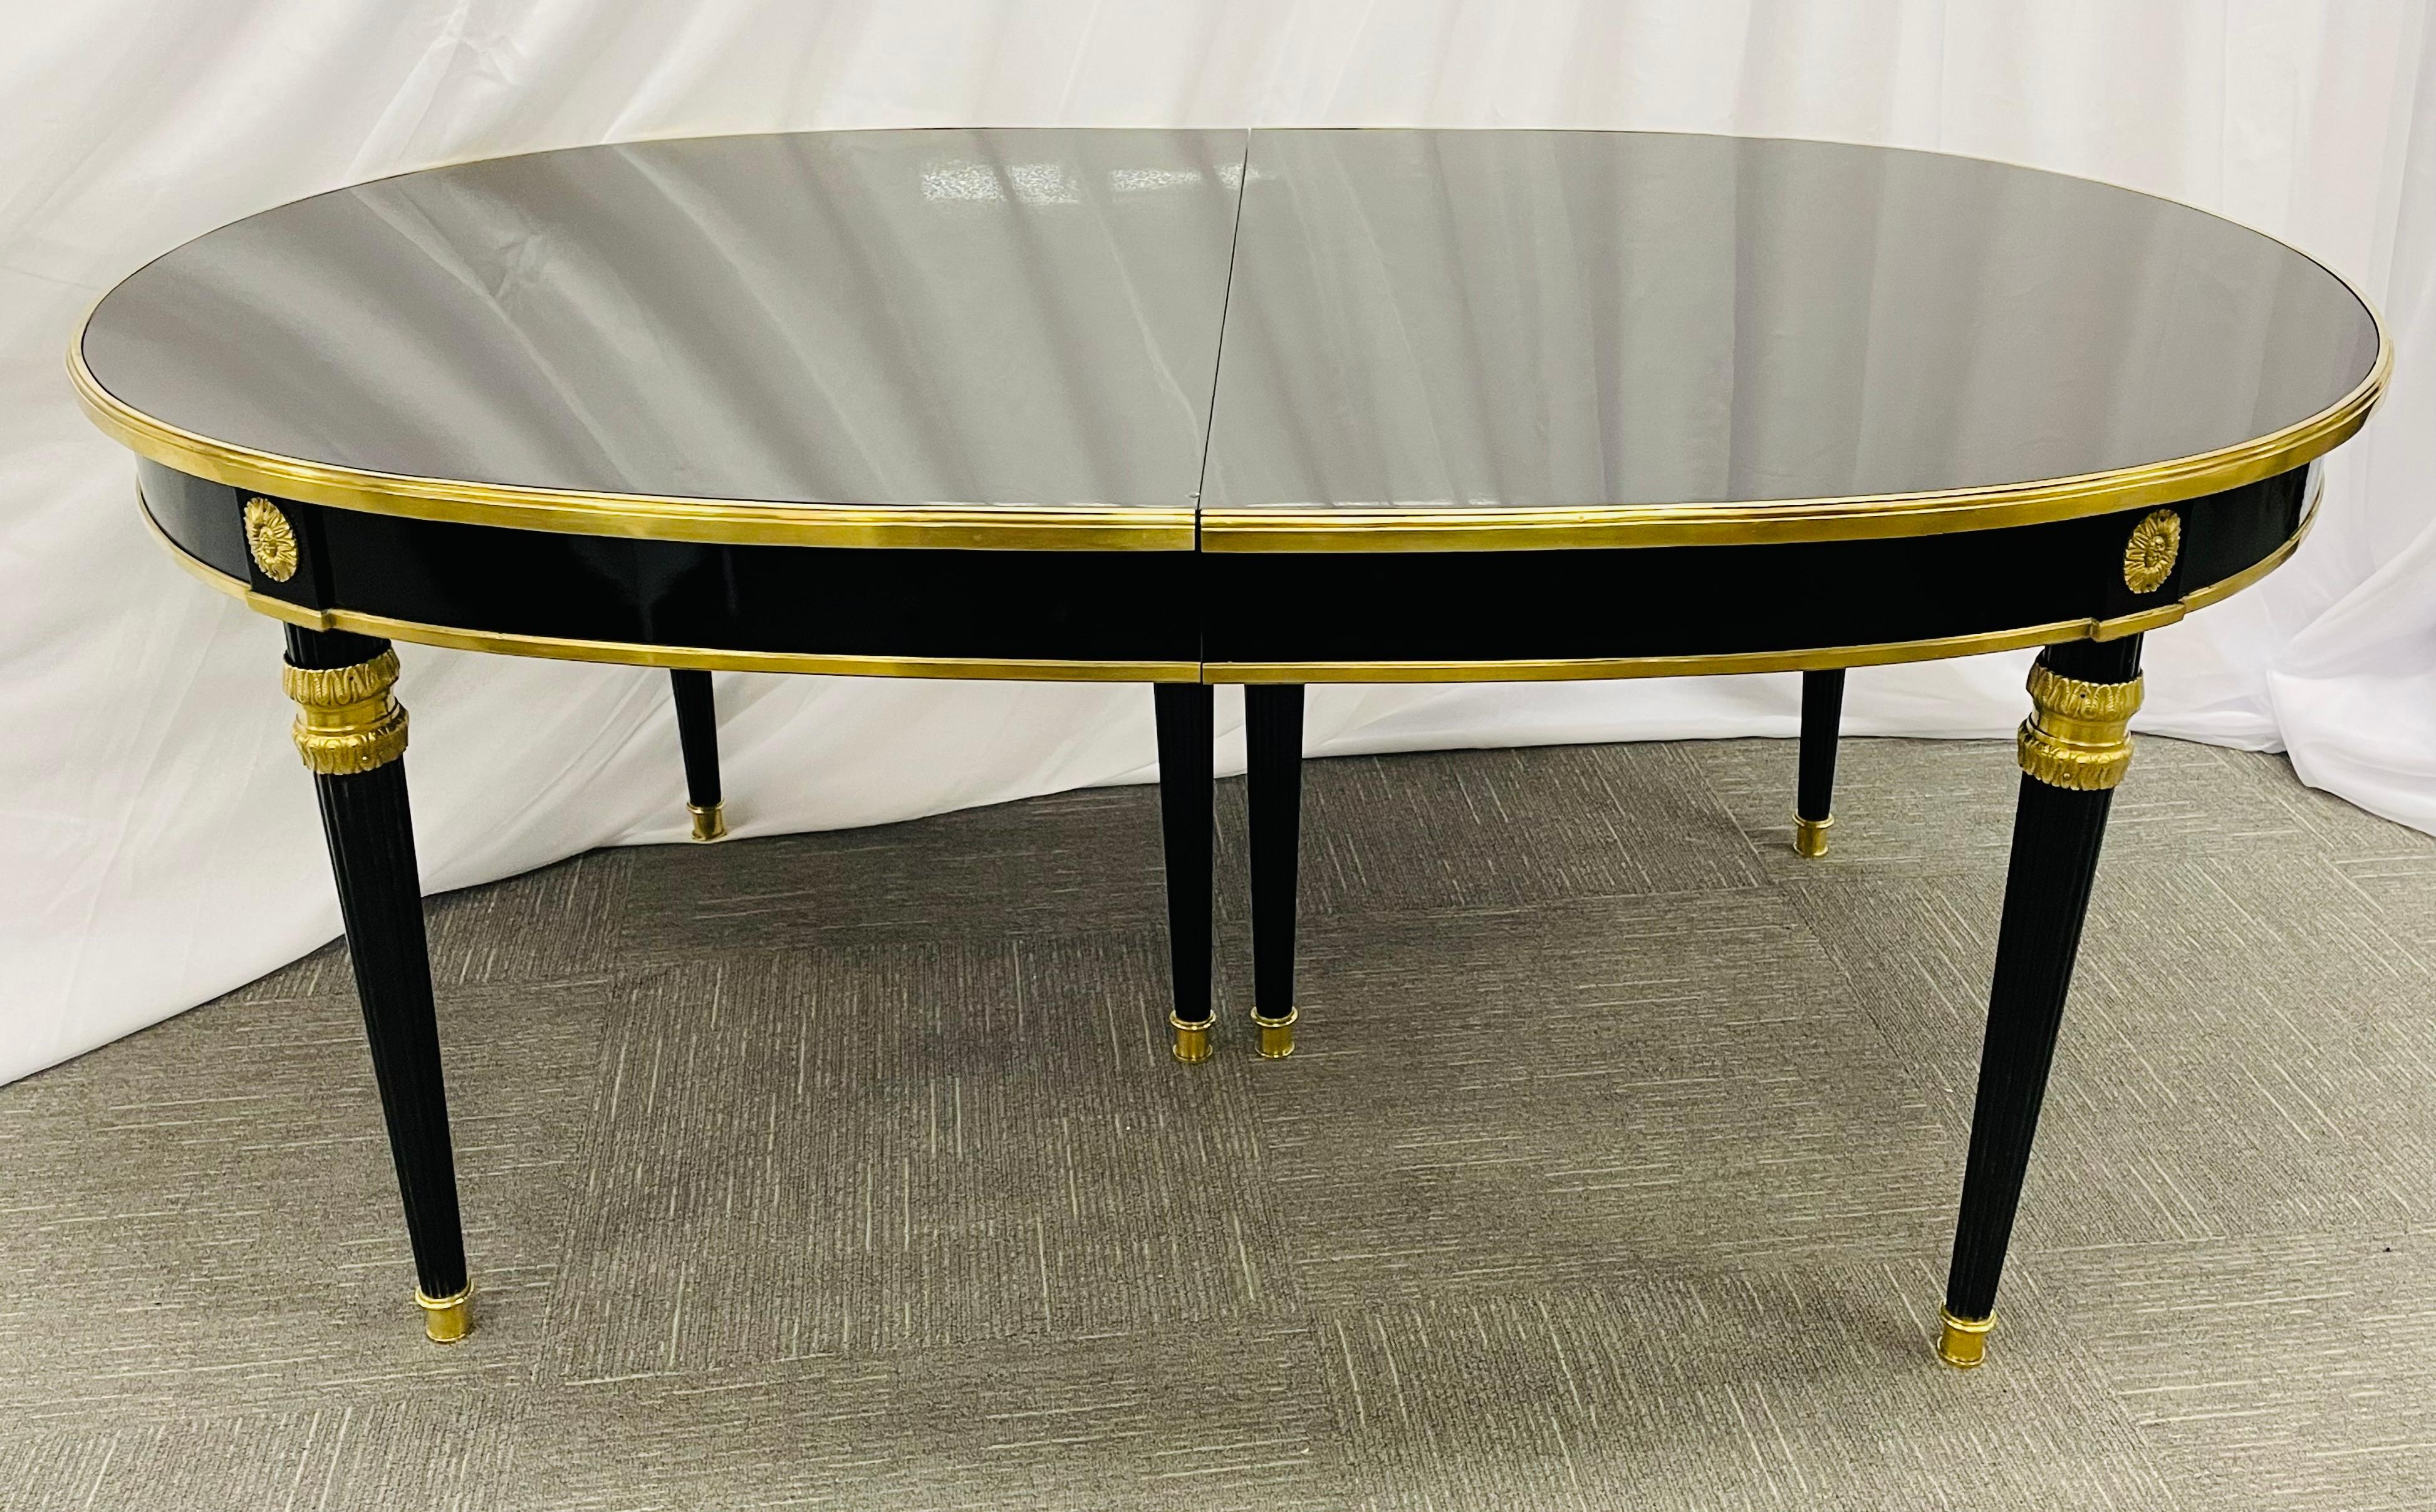 Dining table by Maison Jansen having two 18 inch leaves to extend to seat up to ten to twelve people. This Steinway Black Lacquered dining table has reeded tapering legs on bronze castes terminating in thick finely cast bronze terminals supporting a